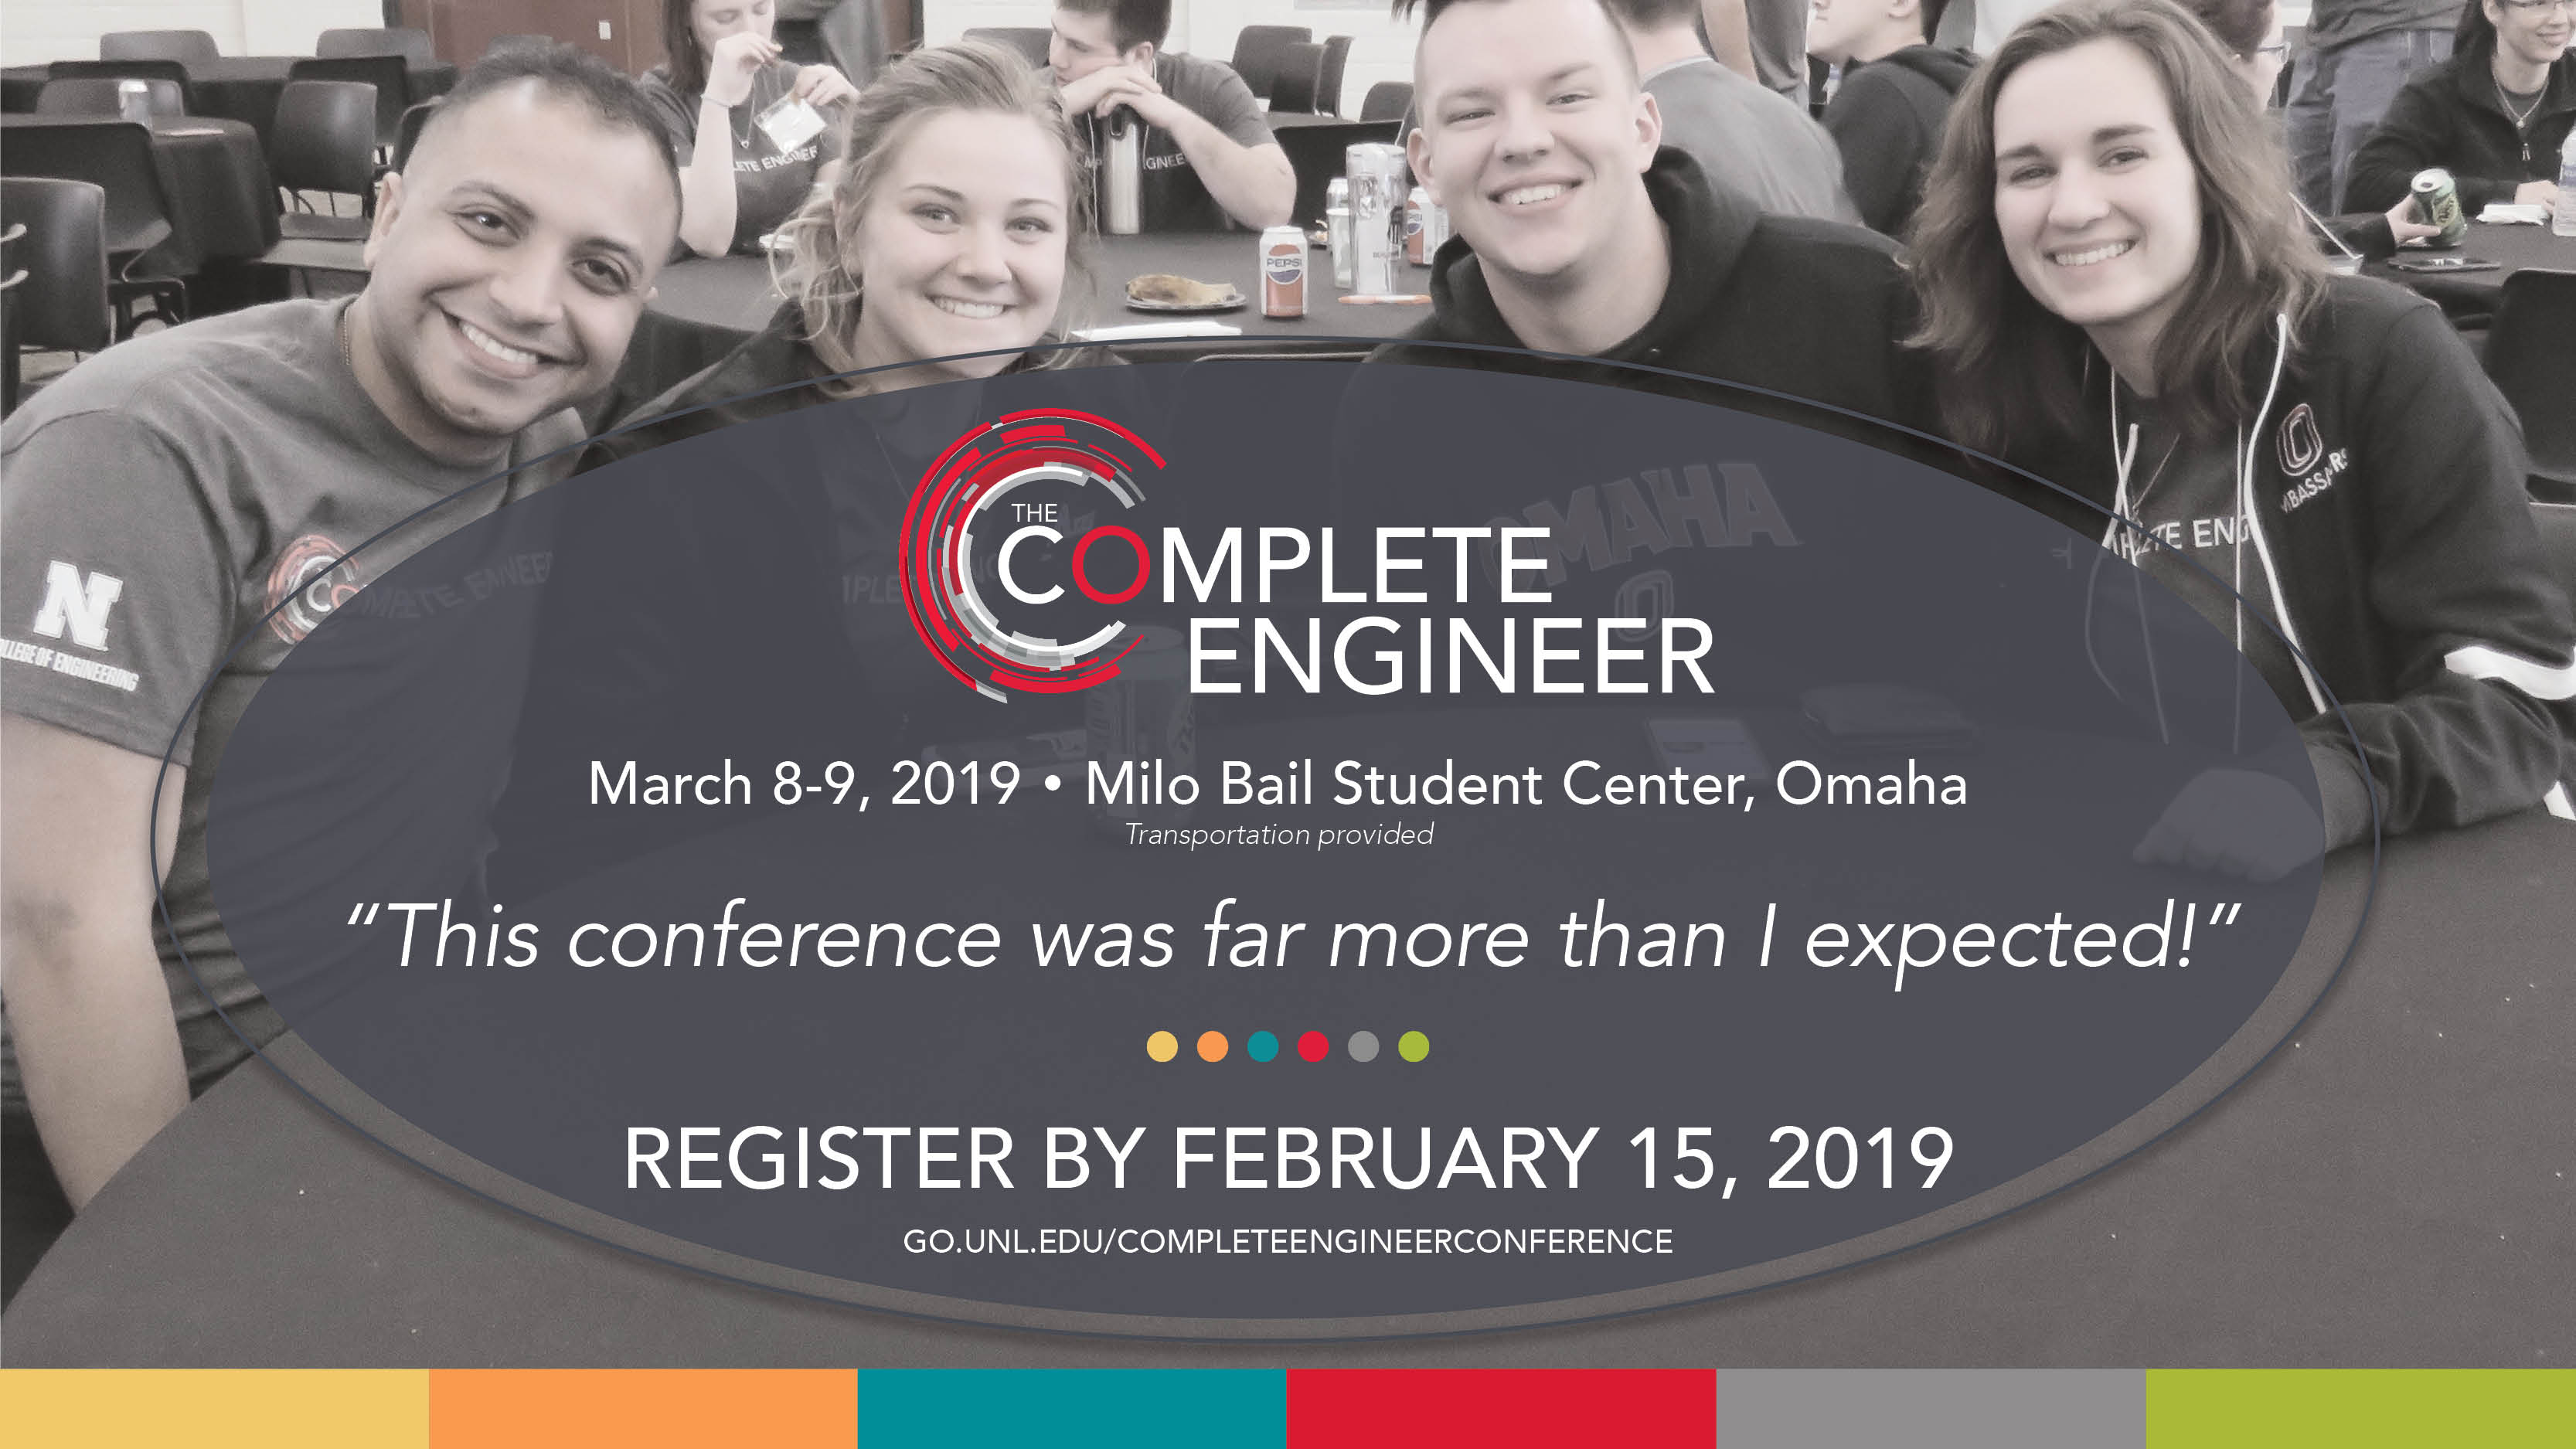 Register now for the Complete Engineer Conference, March 8-9.